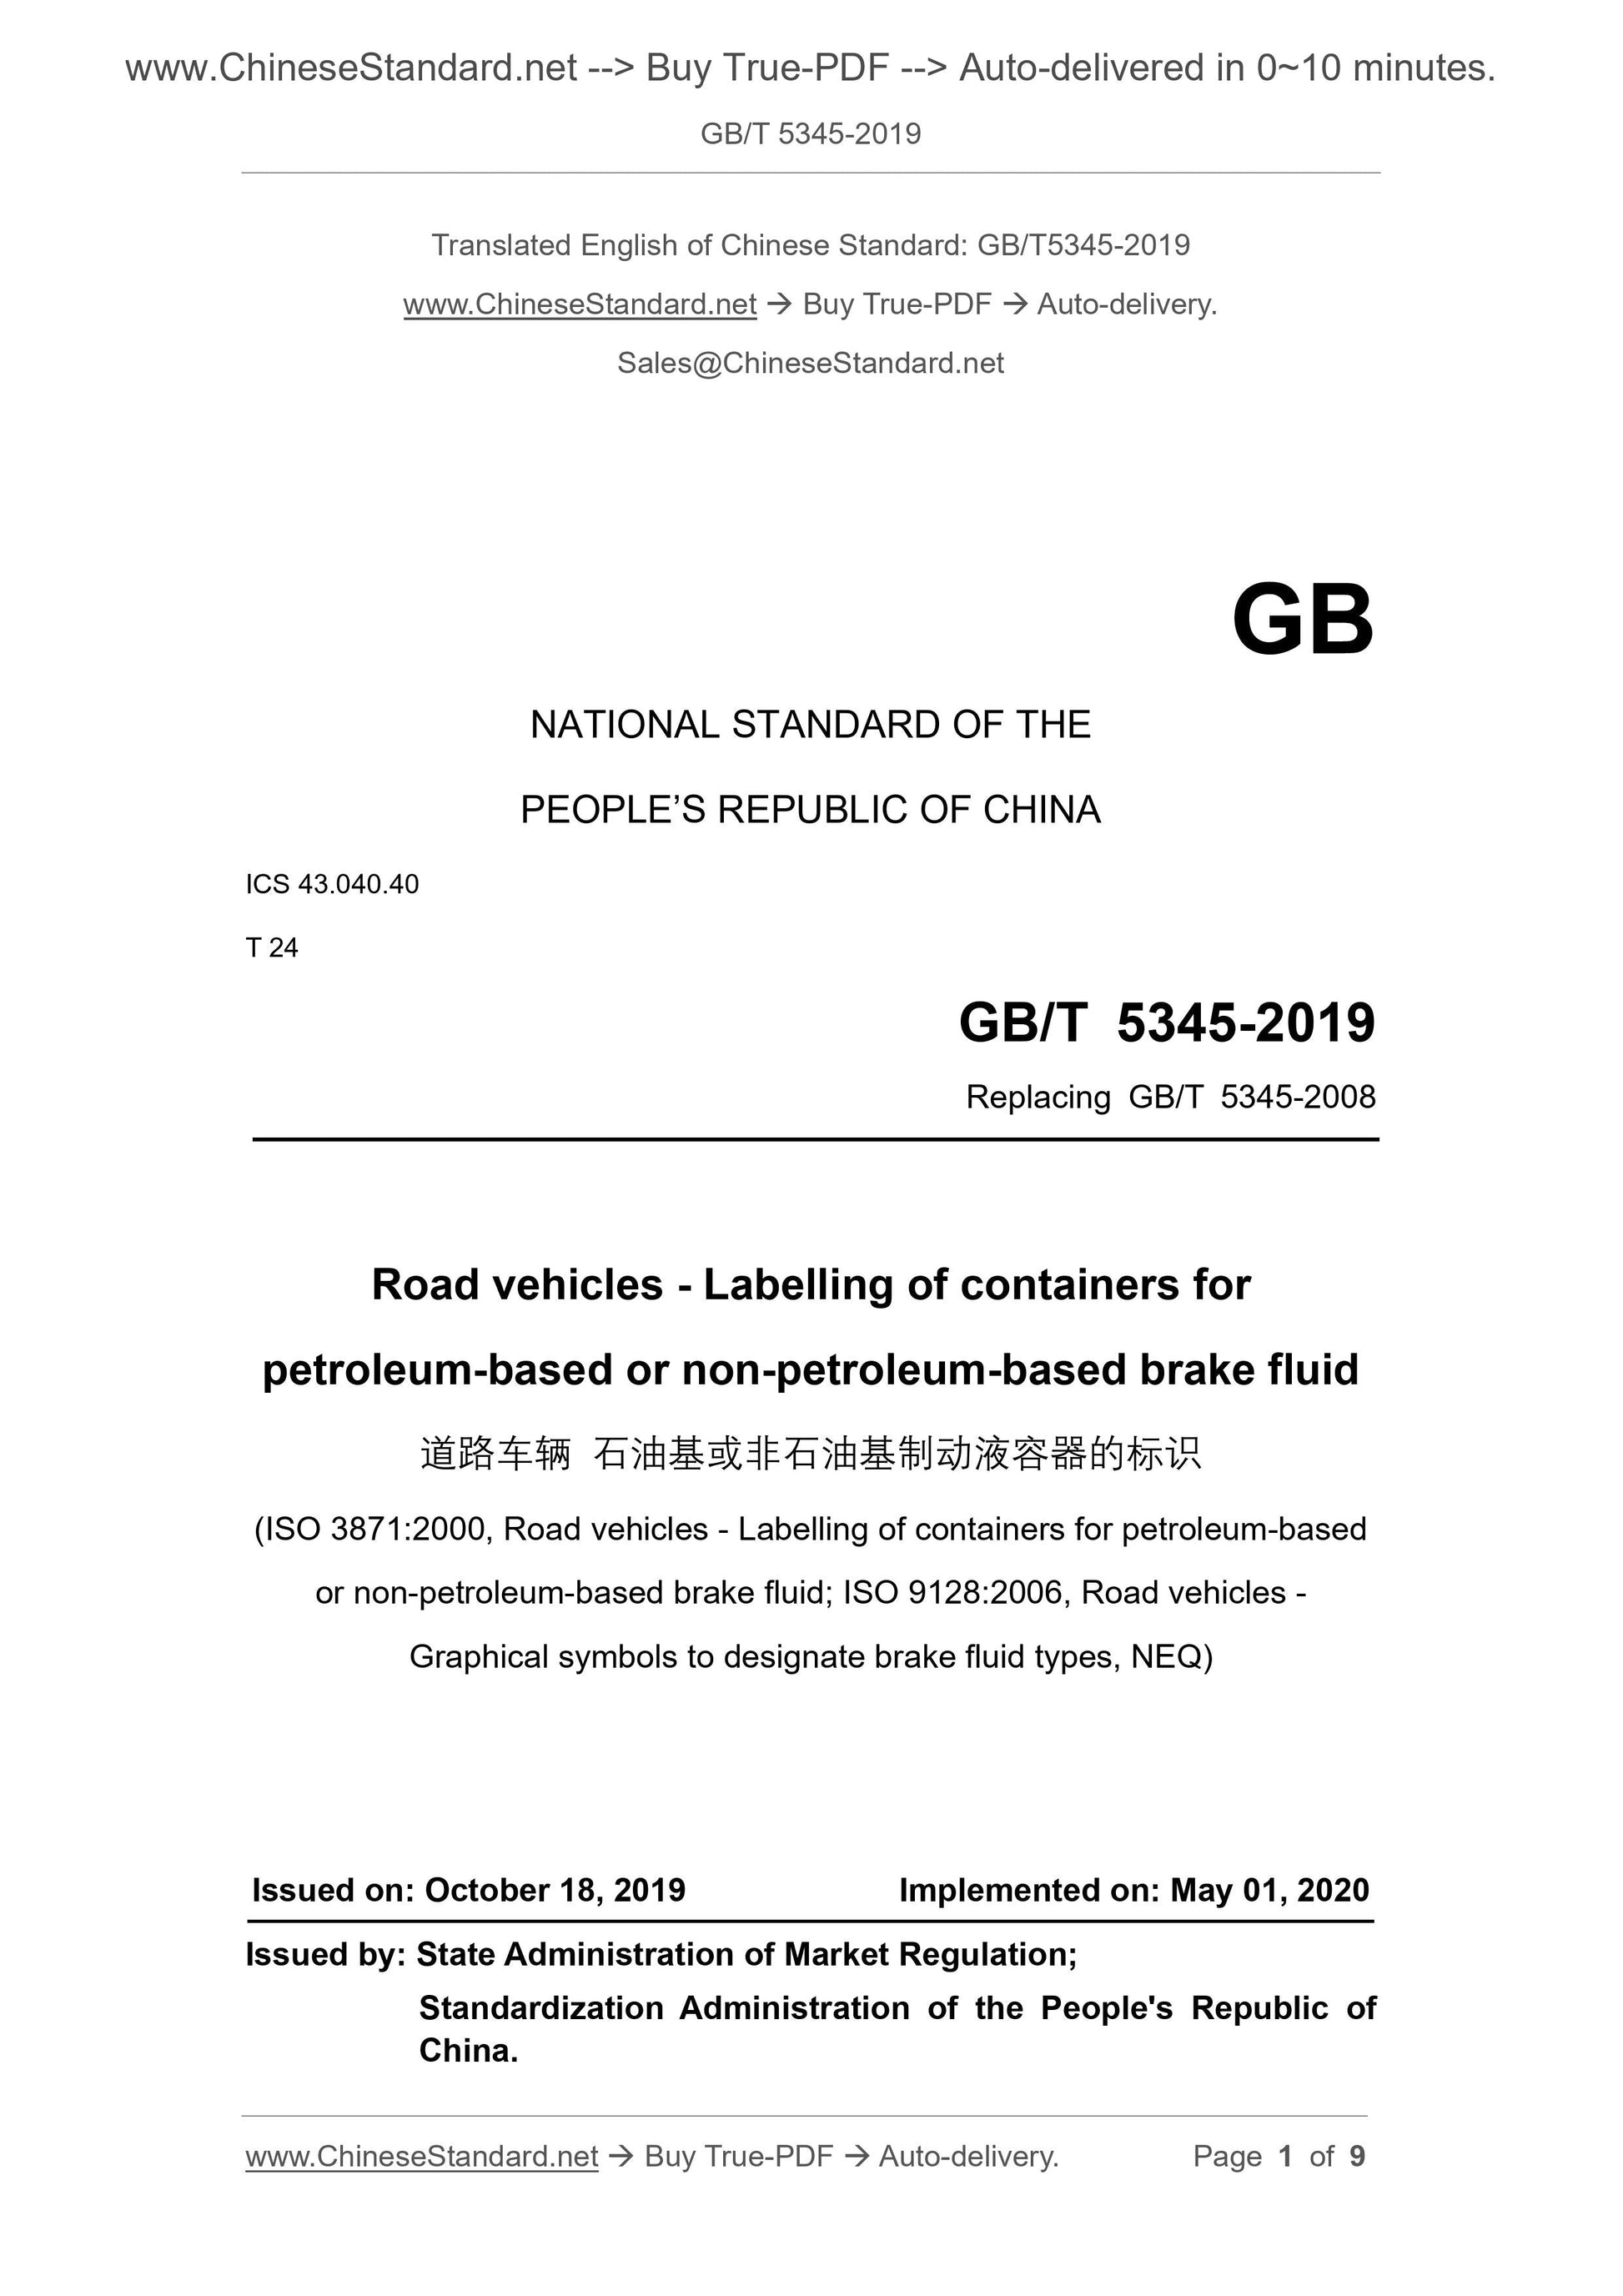 GB/T 5345-2019 Page 1